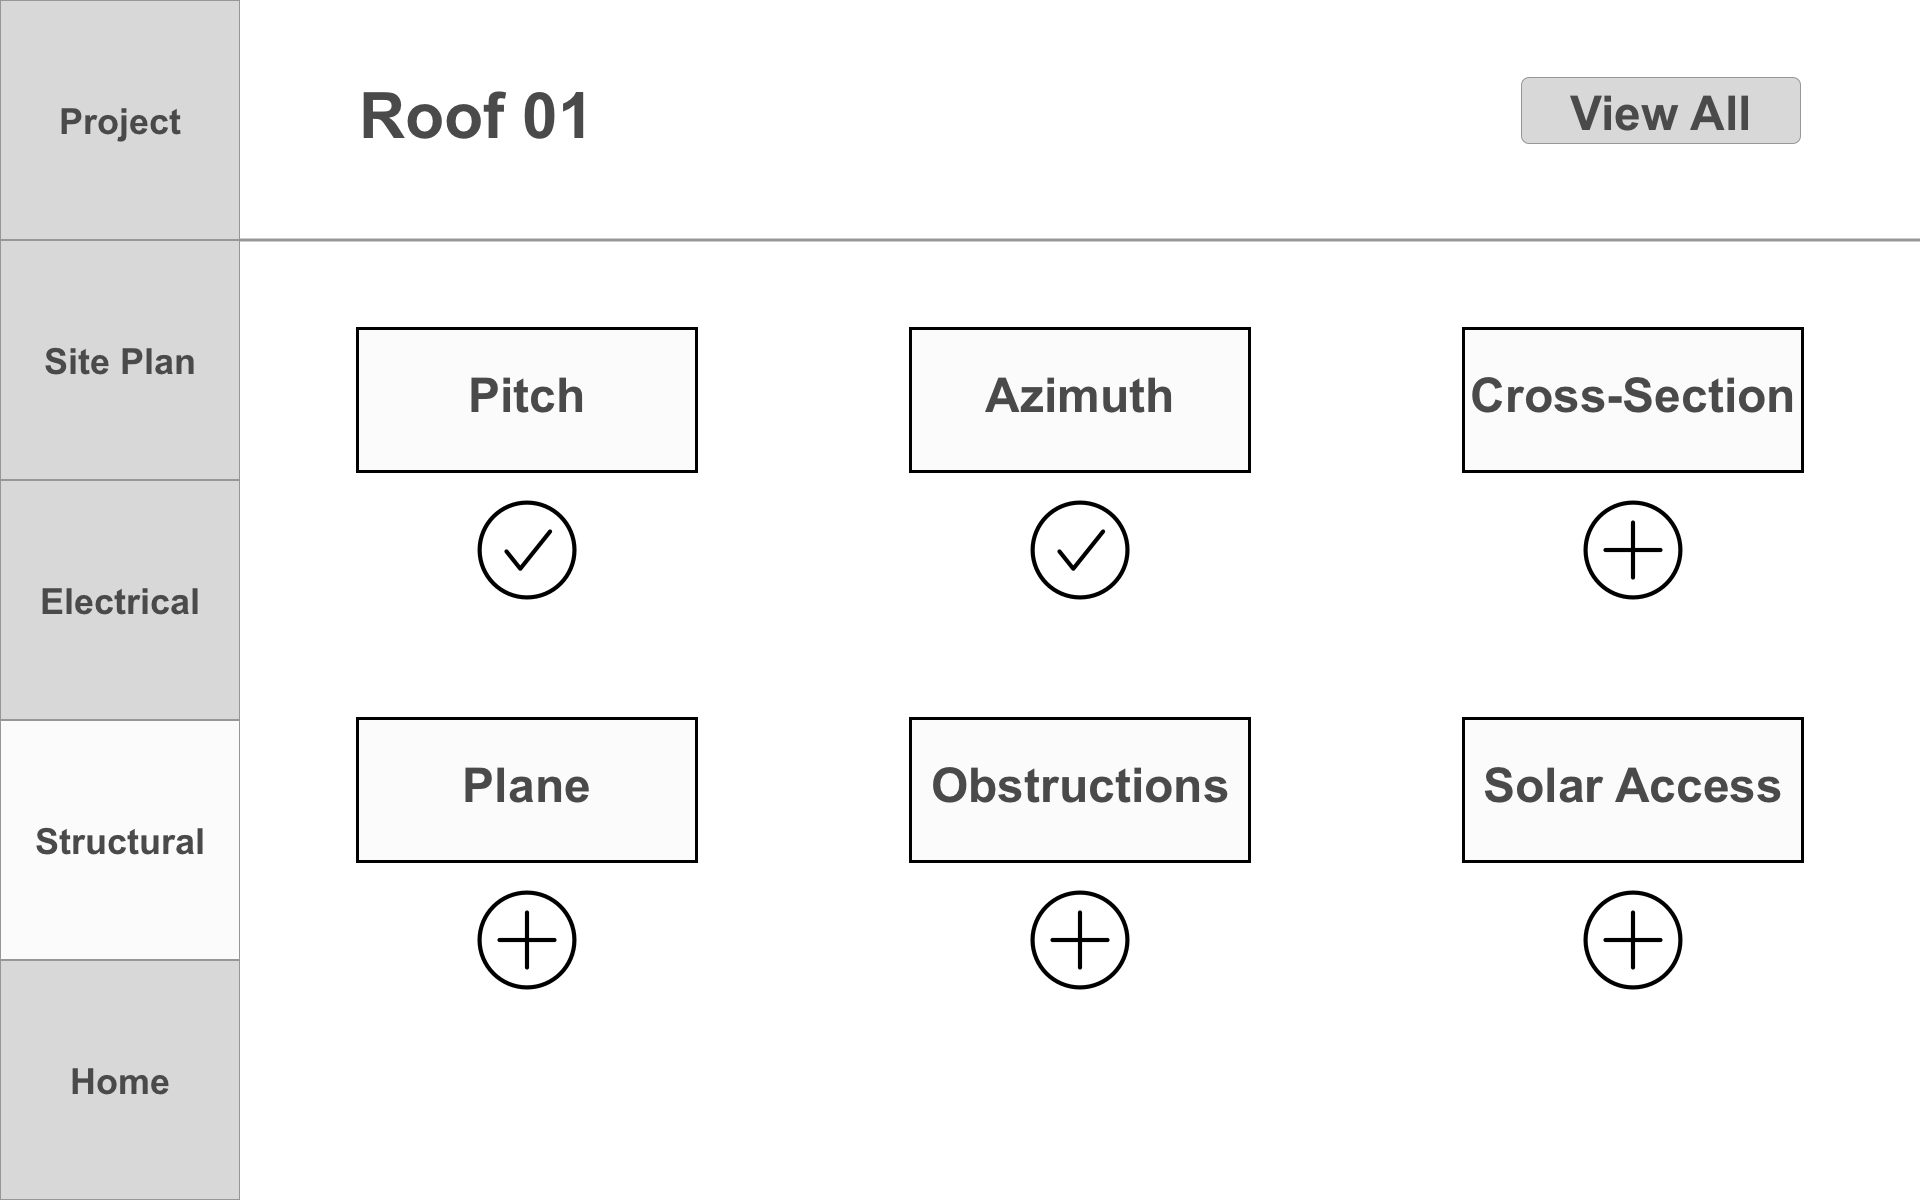 4.0.0_Structural_Roof-Detail Copy.png